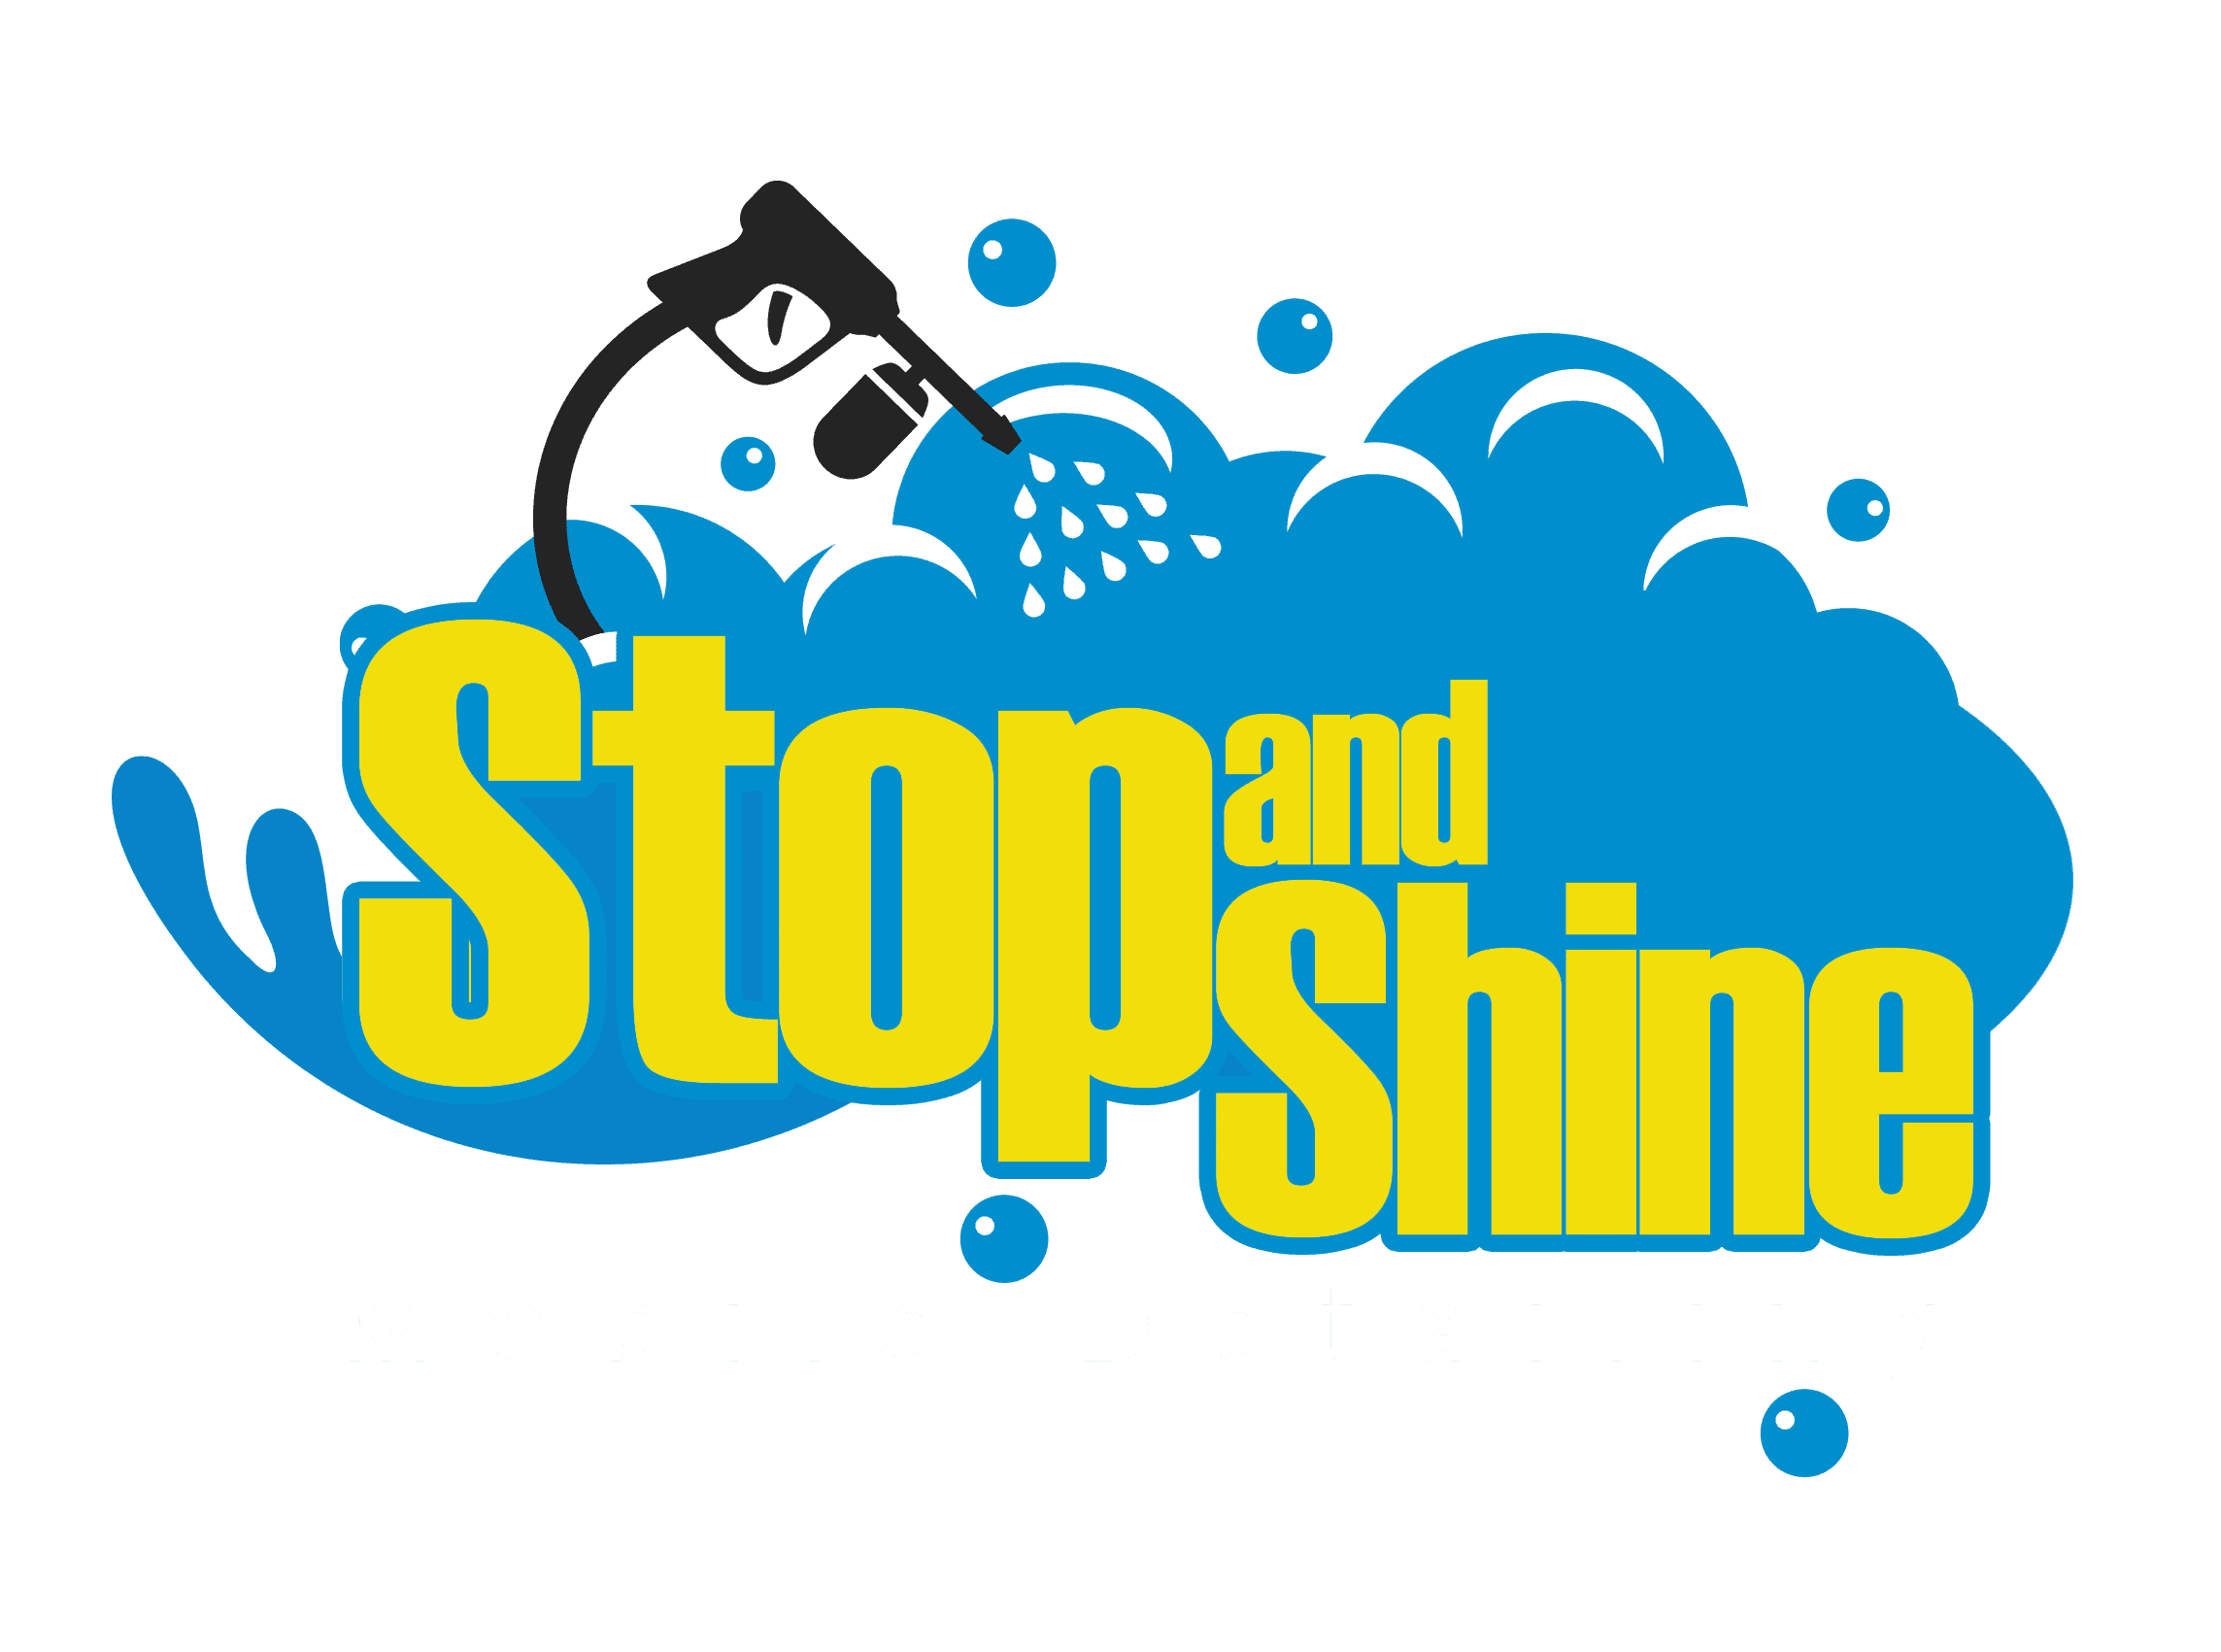 Stop and Shine Mobile Detailing